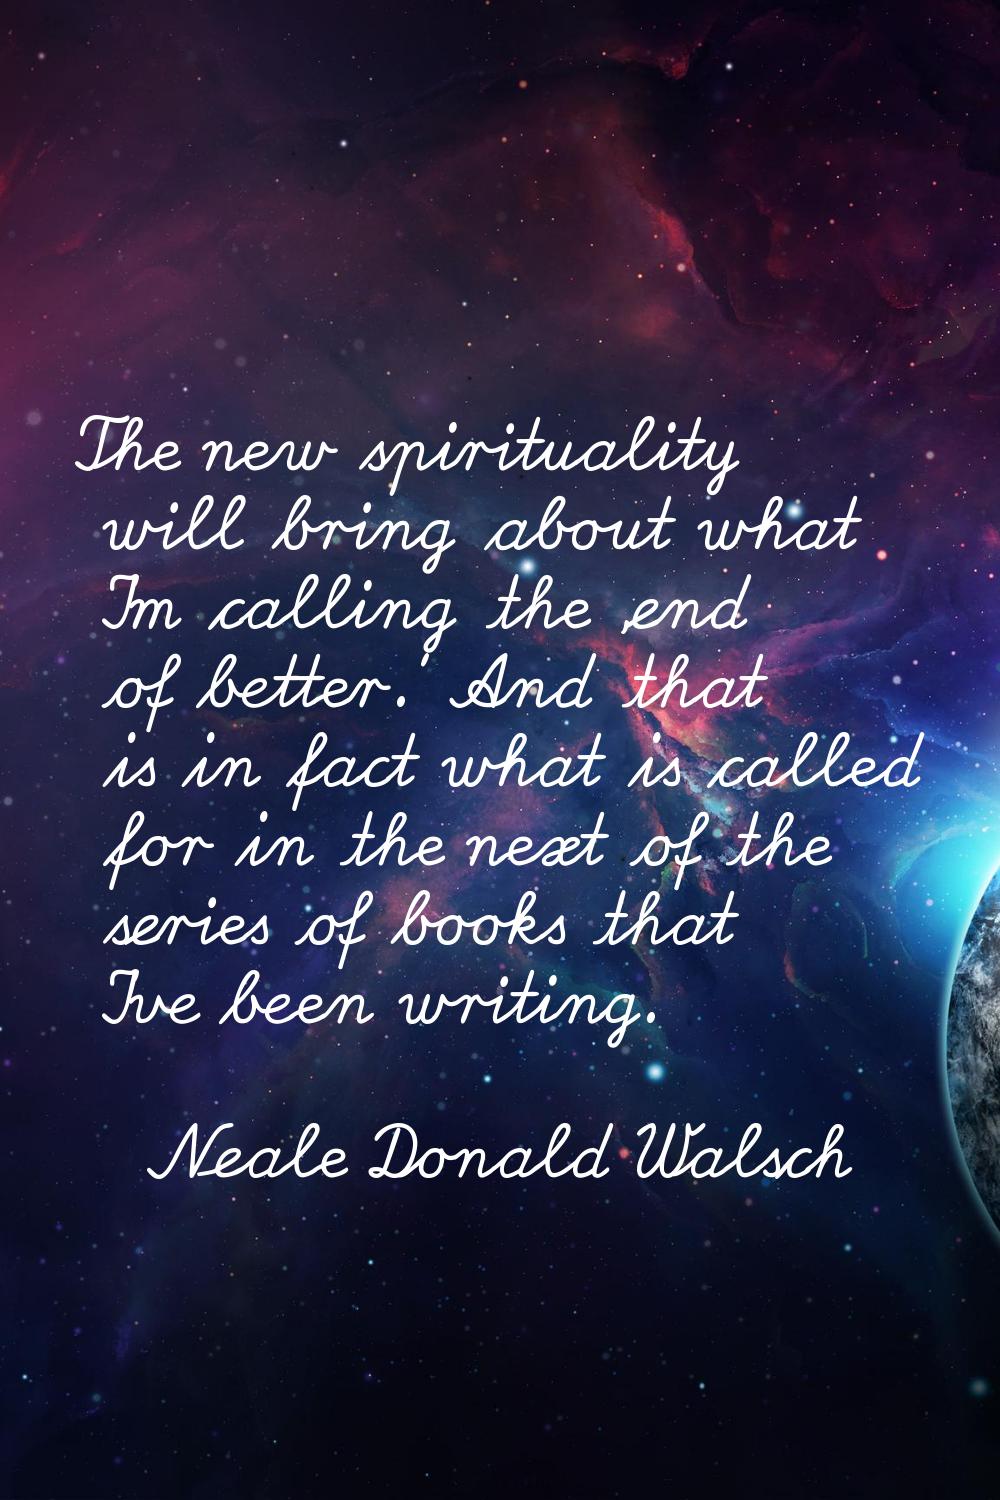 The new spirituality will bring about what I'm calling the 'end of better.' And that is in fact wha